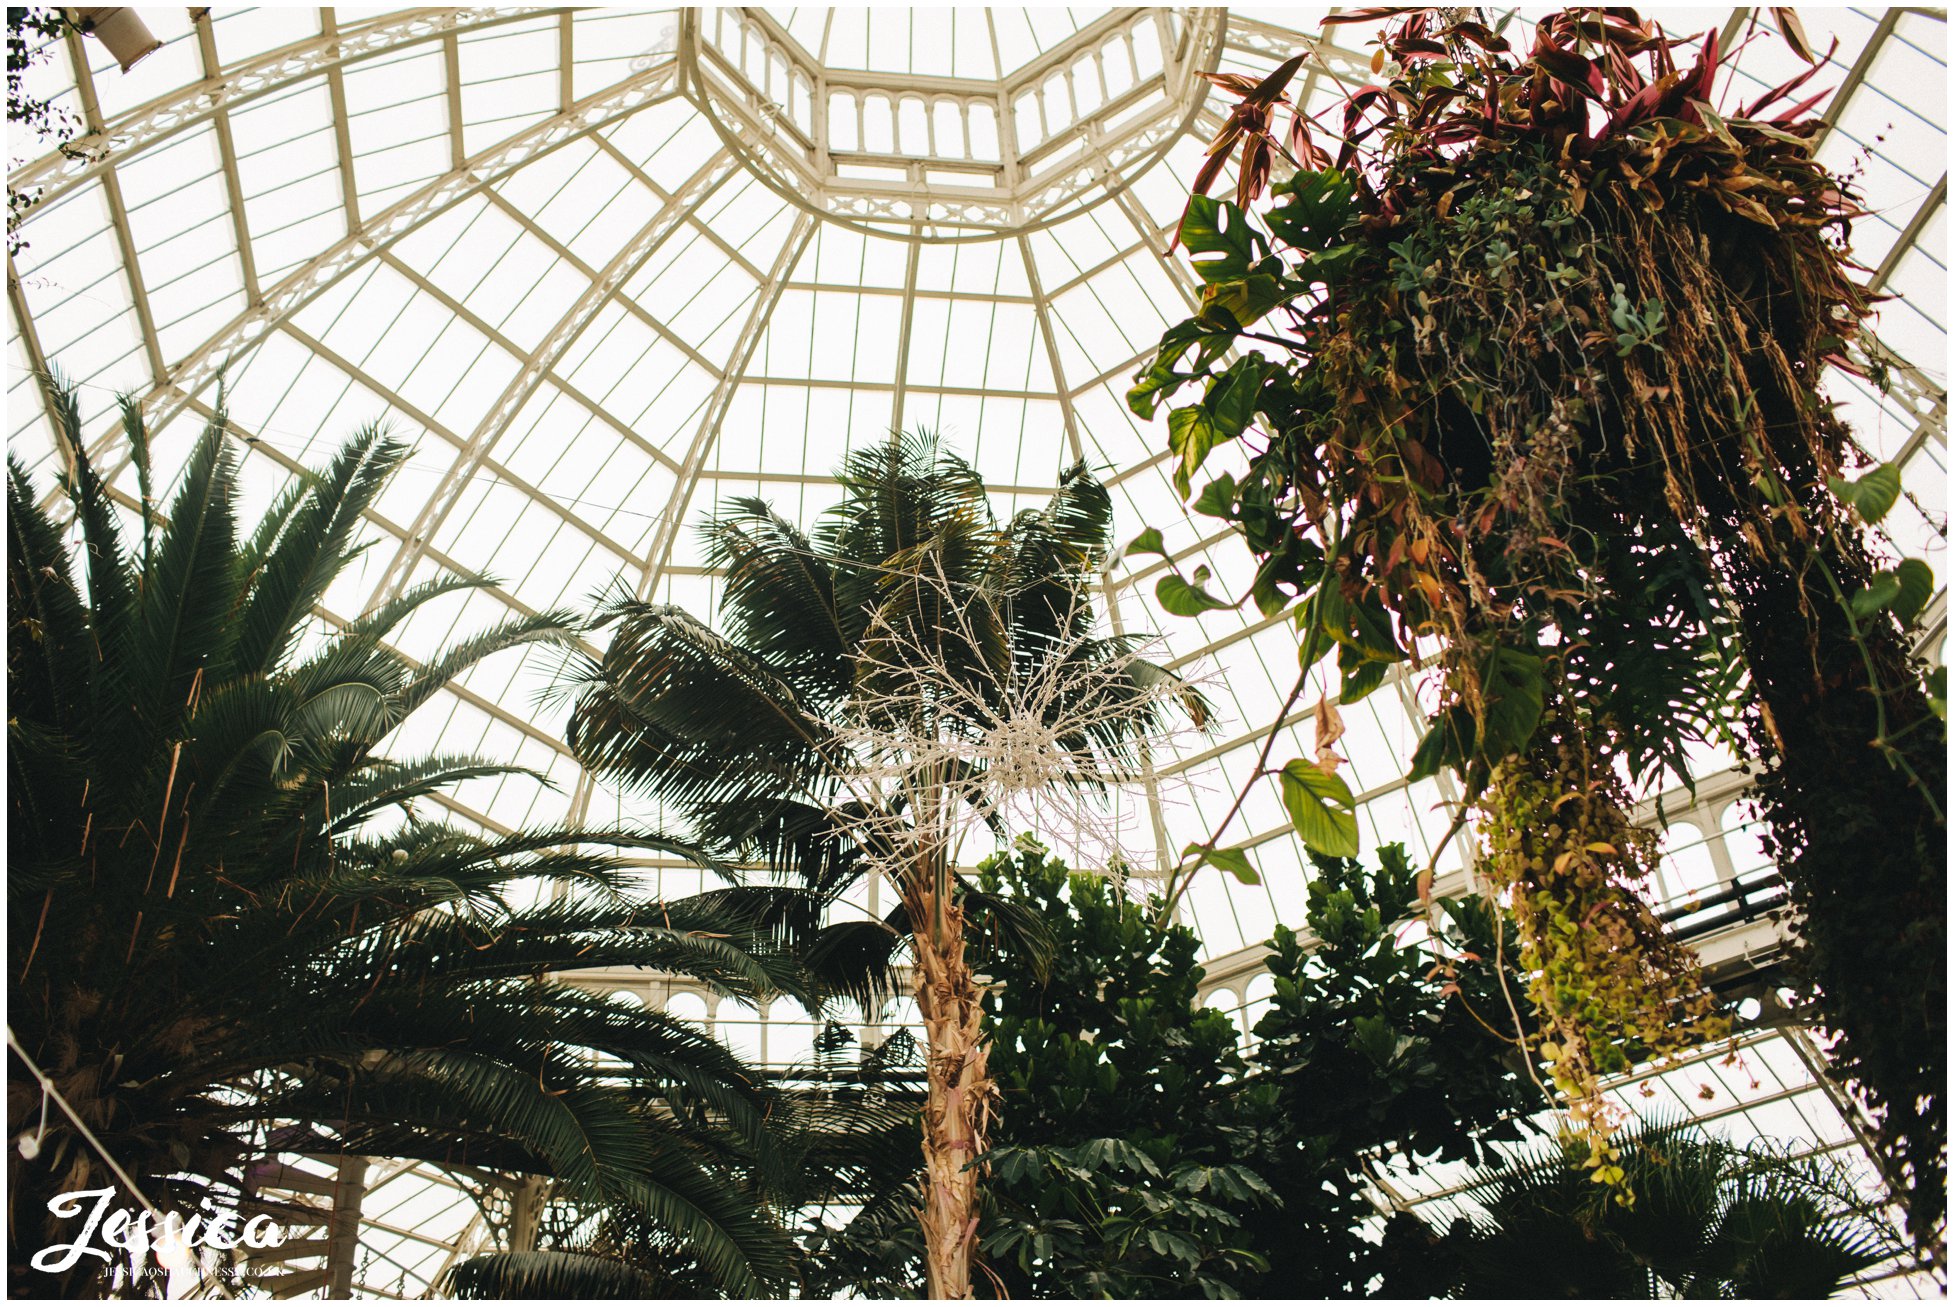 trees decorate sefton palm house in liverpool